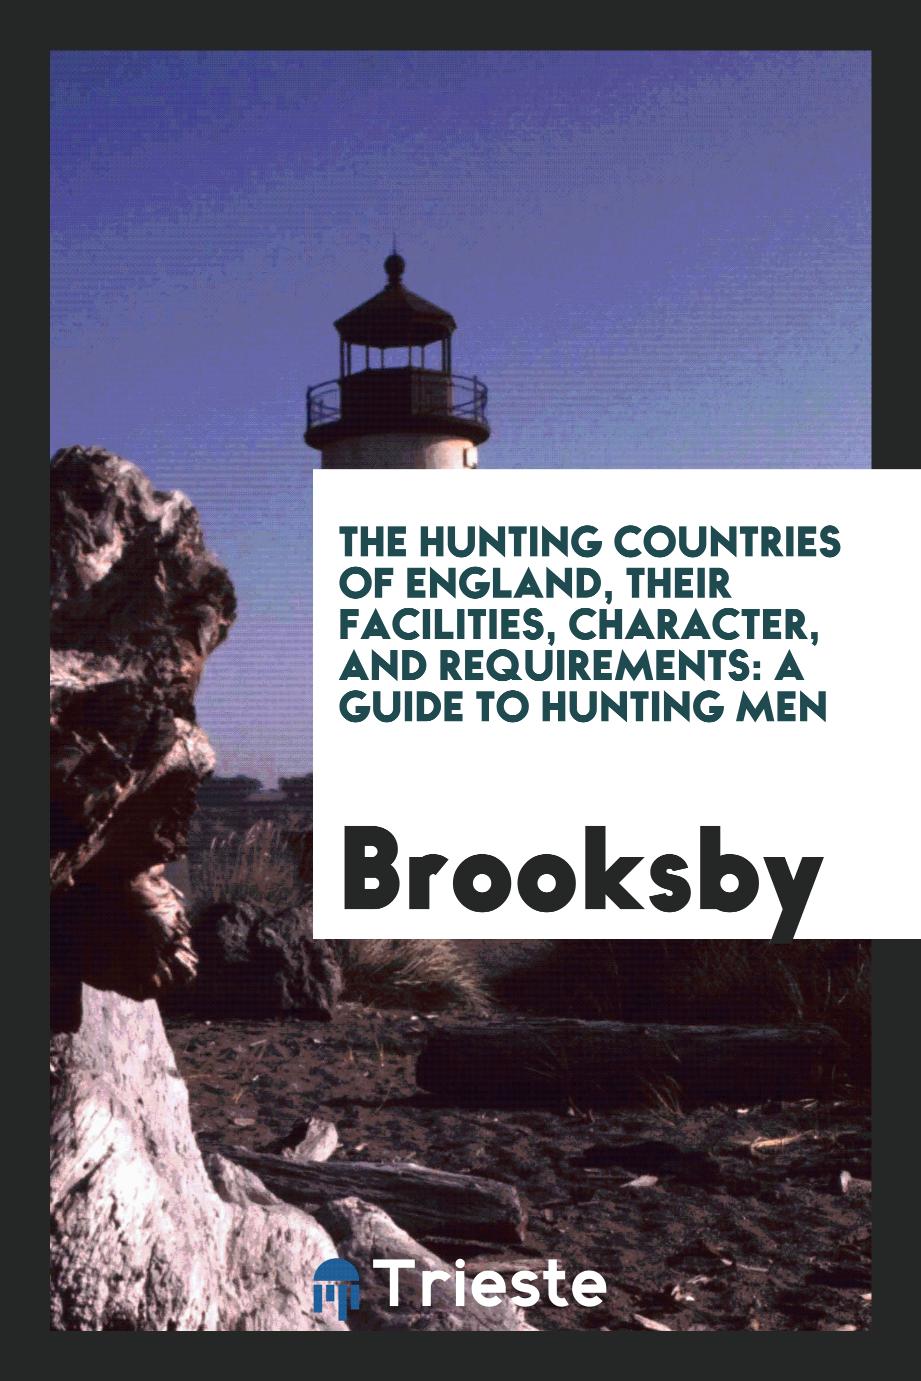 The Hunting Countries of England, Their Facilities, Character, and Requirements: A Guide to Hunting Men